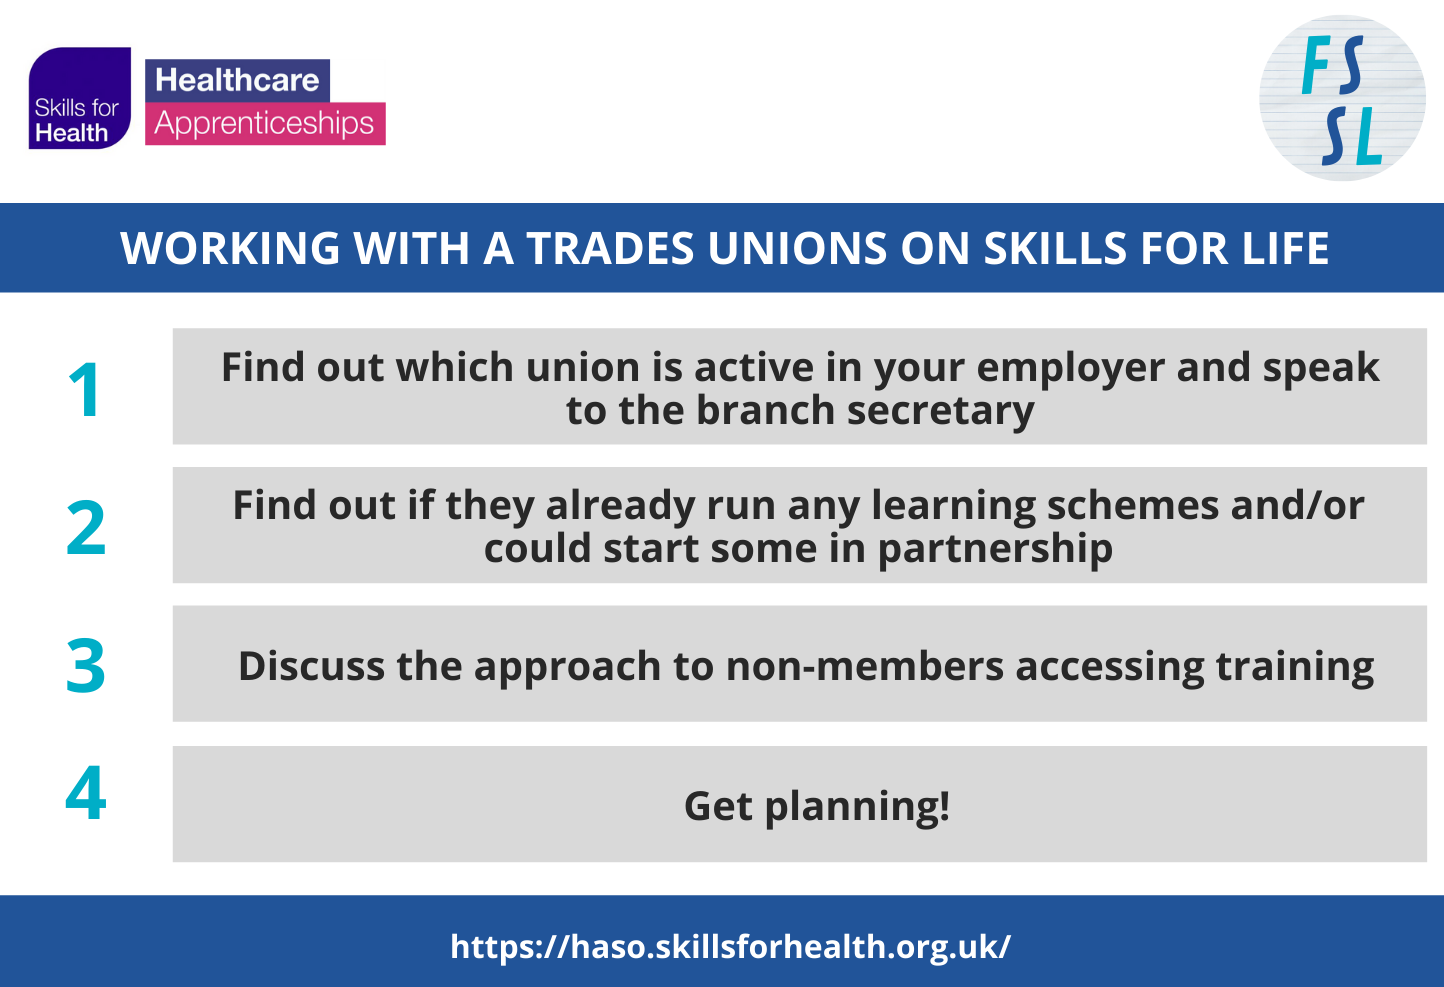 Working with Trade Unions on Skills for Life 
(1)	Find out which union is active in your employer and speak to the branch secretary. 
(2)	Find out if they already run any learning schemes and / or could start some in partnership. 
(3)	Discuss the approach to non-members accessing training. 
(4)	Get planning!